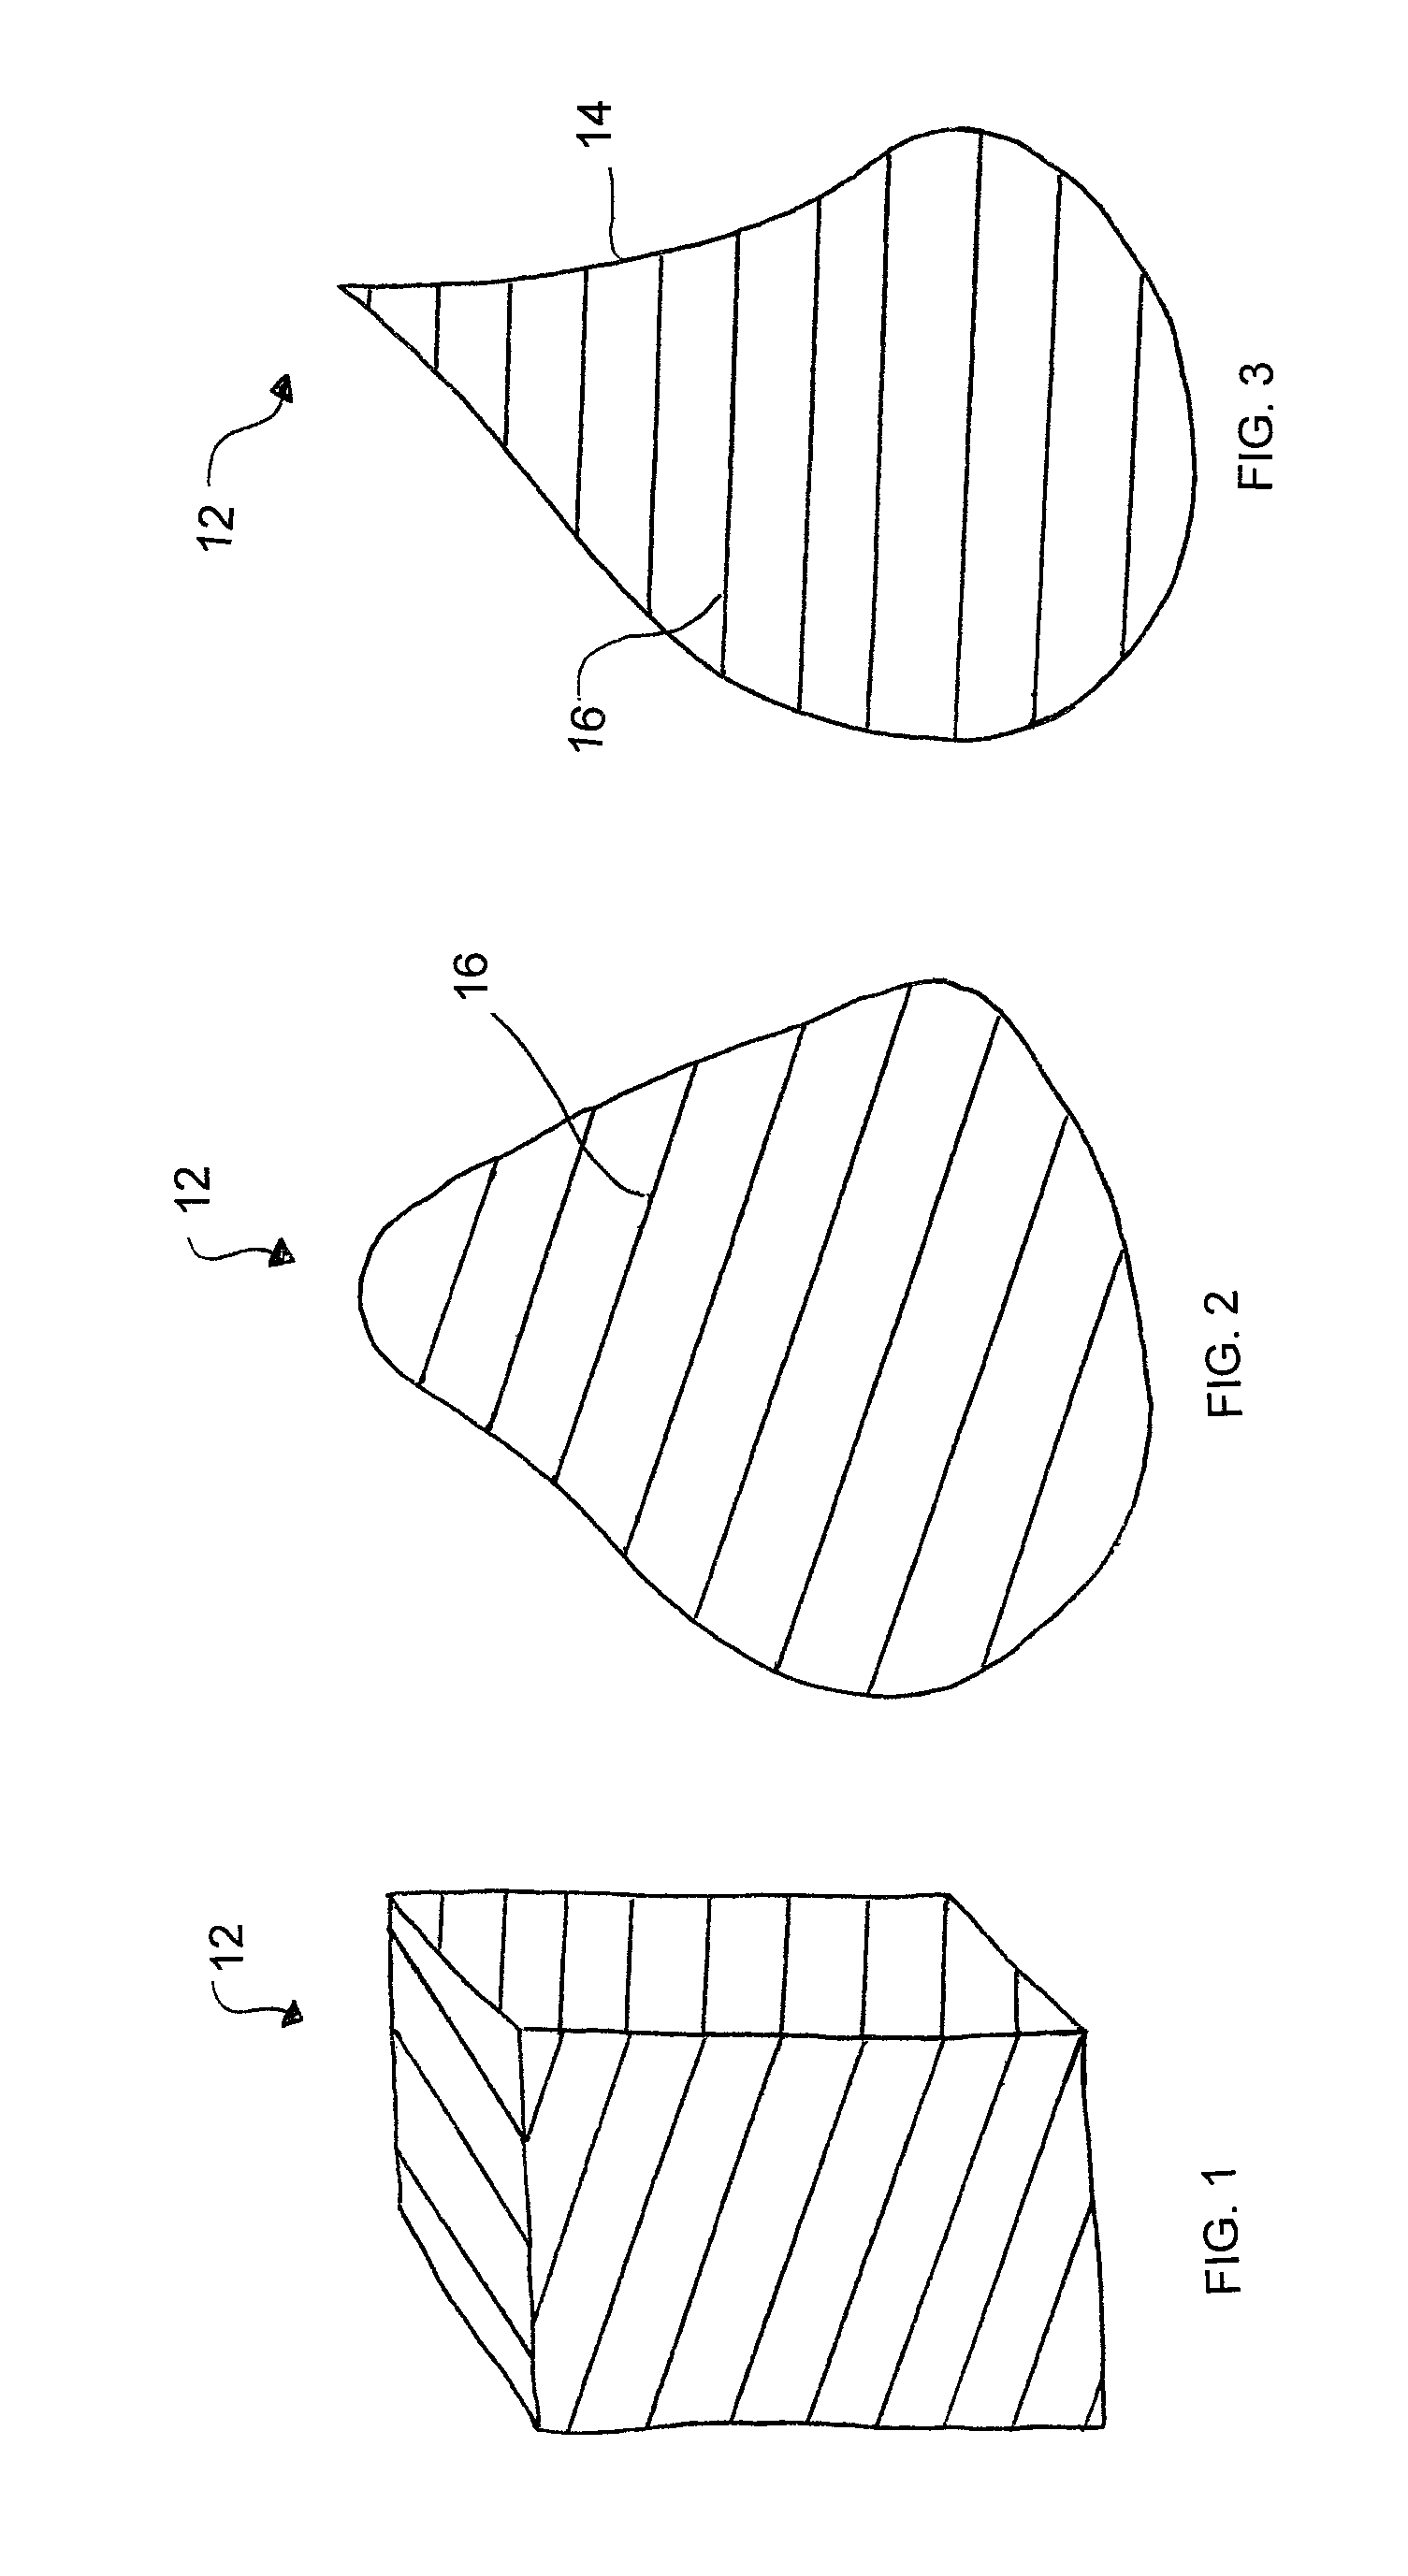 Method of forming a breast prosthesis